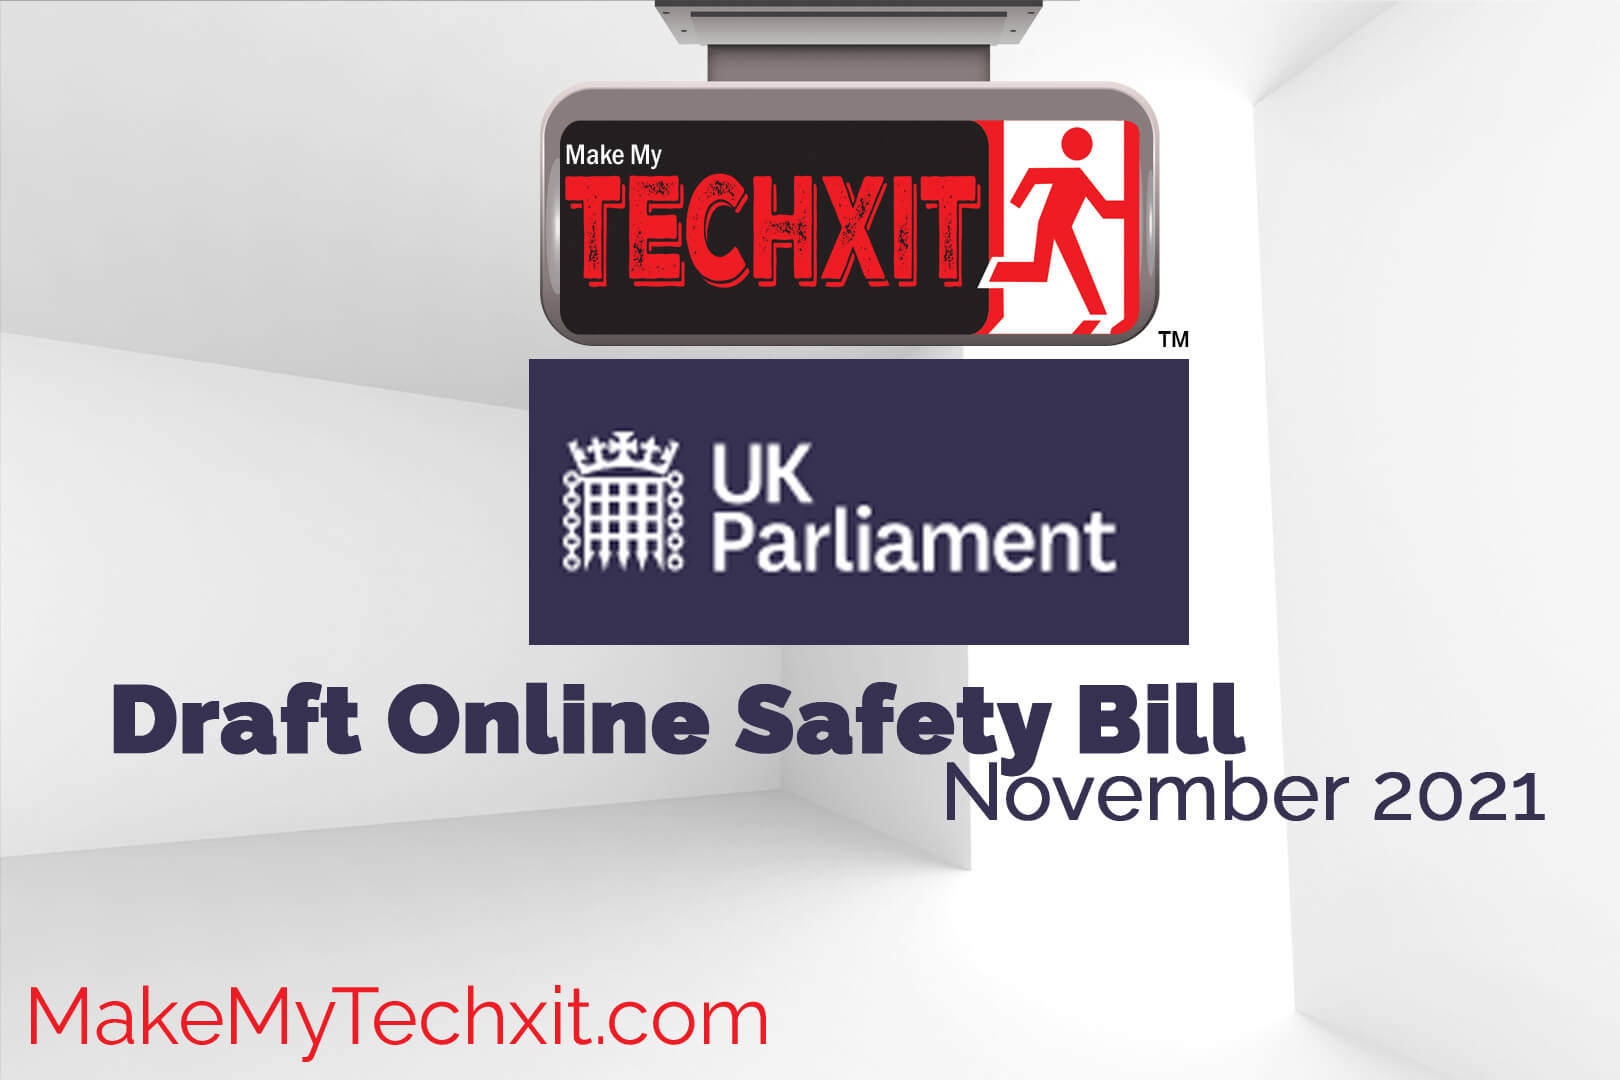 https://committees.parliament.uk/committee/534/draft-online-safety-bill-joint-committee/publications/